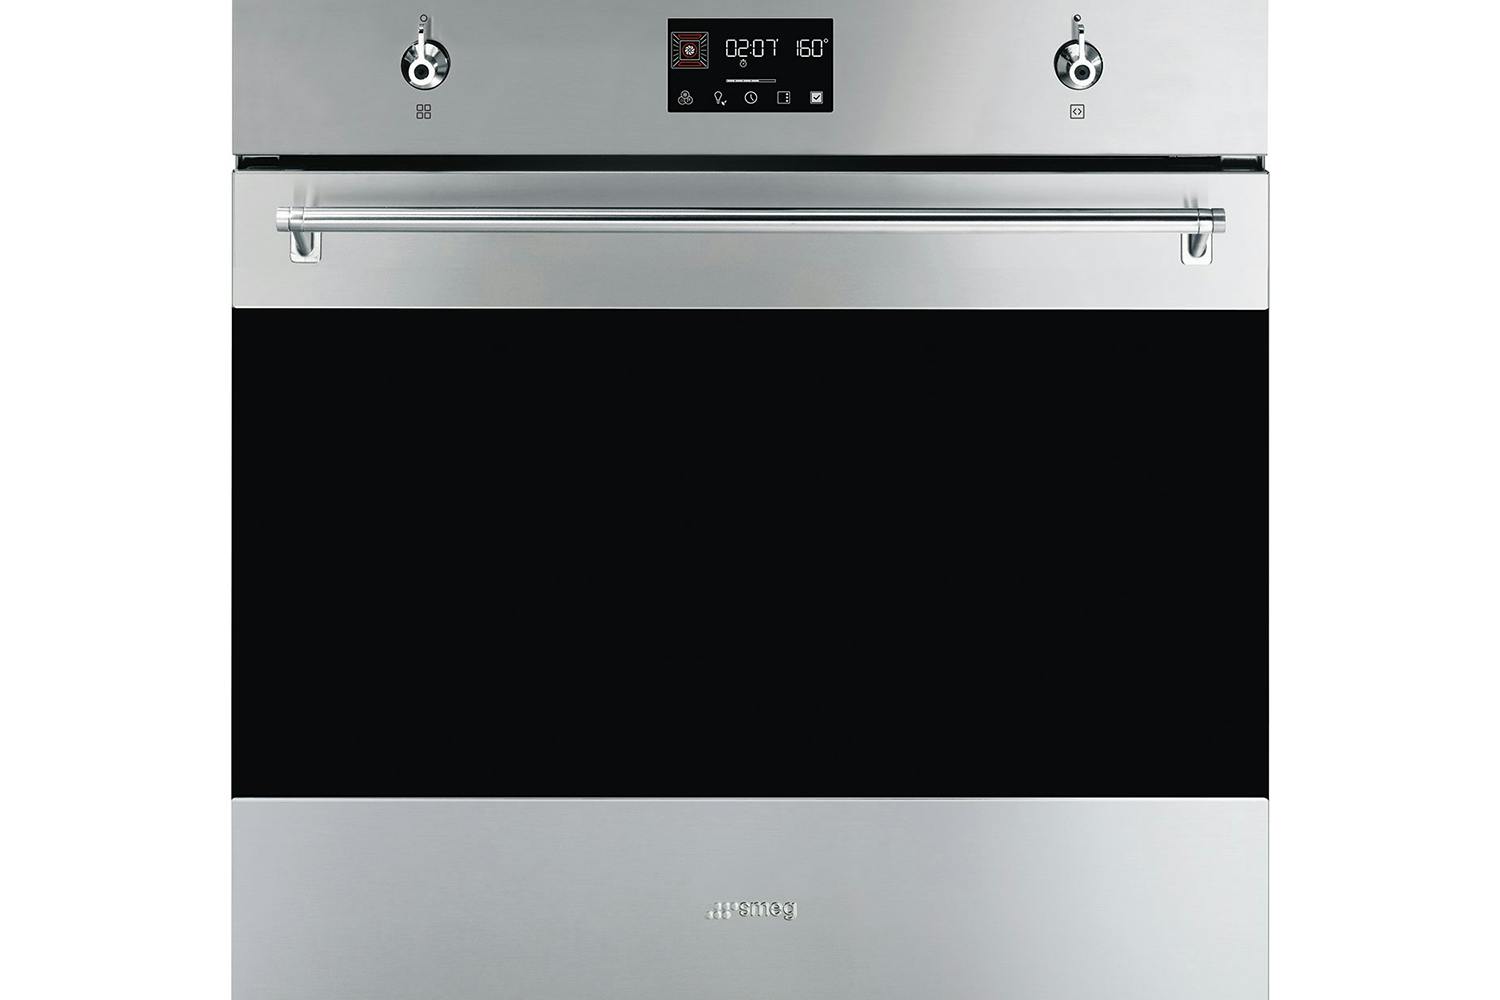 Smeg Classica Electric Single Oven | SOP6302TX | Stainless Steel